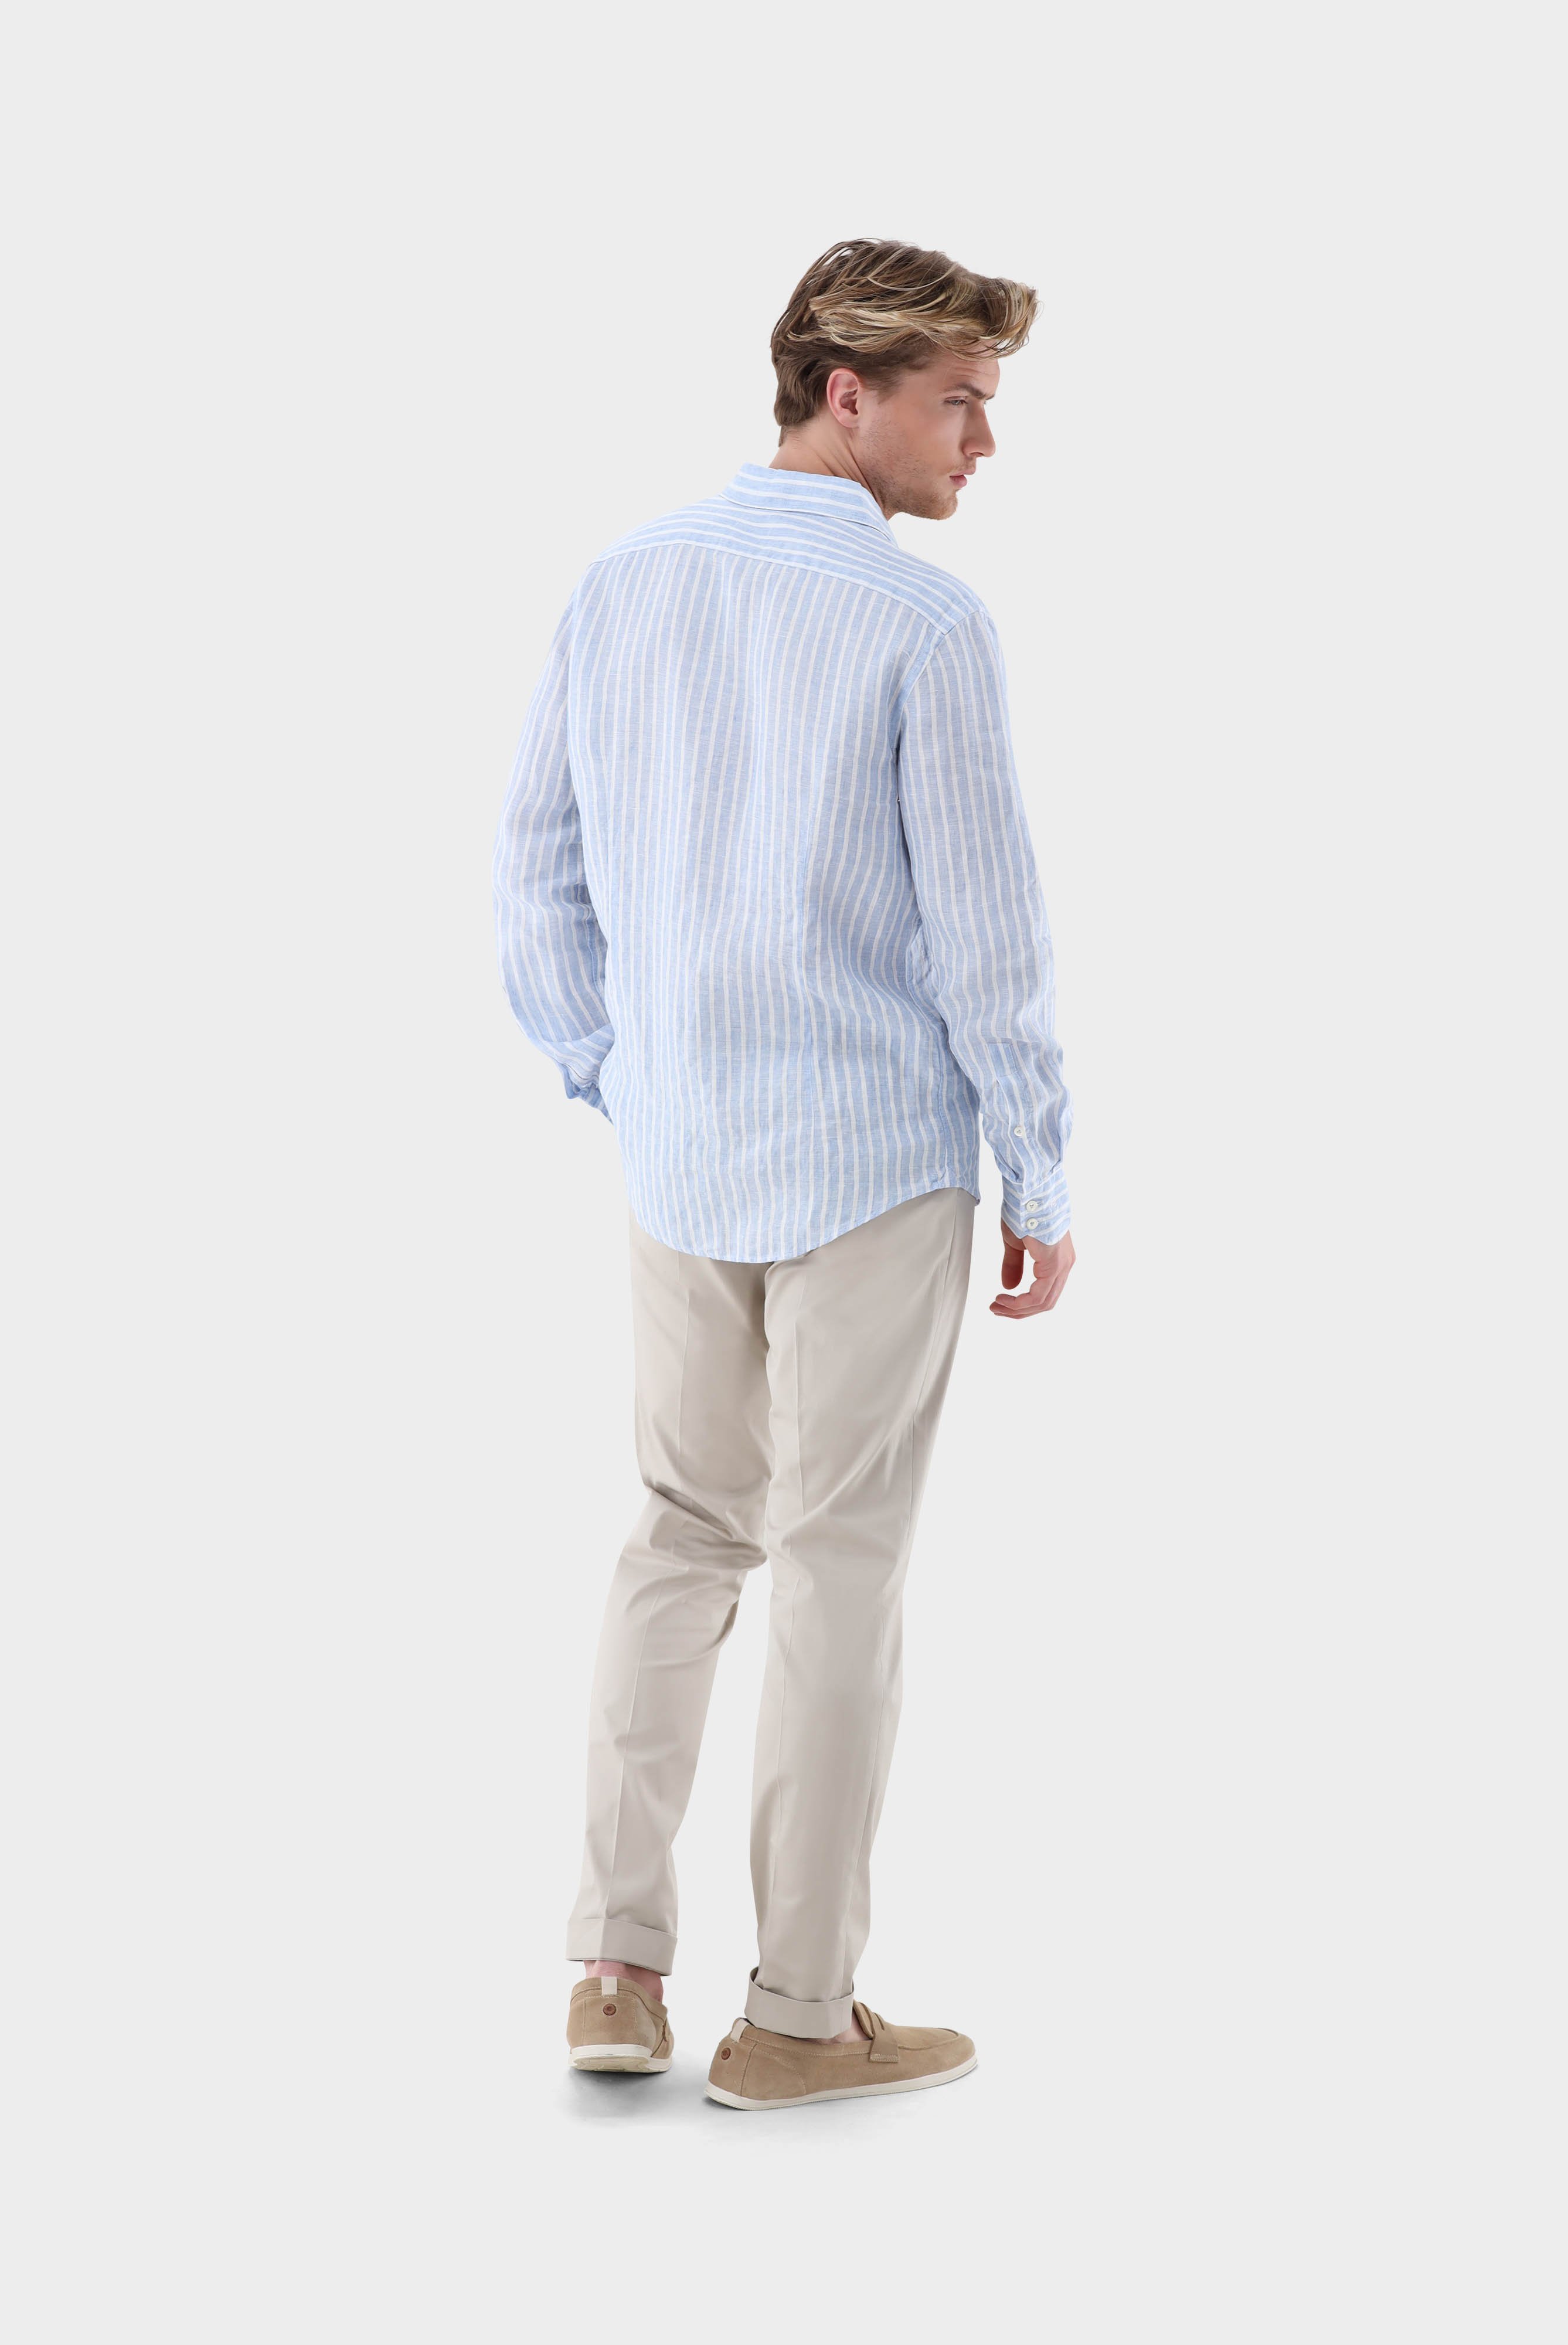 Casual Shirts+Linen Dobby Striped Shirt Tailor Fit+20.2016.9V.156441.730.39